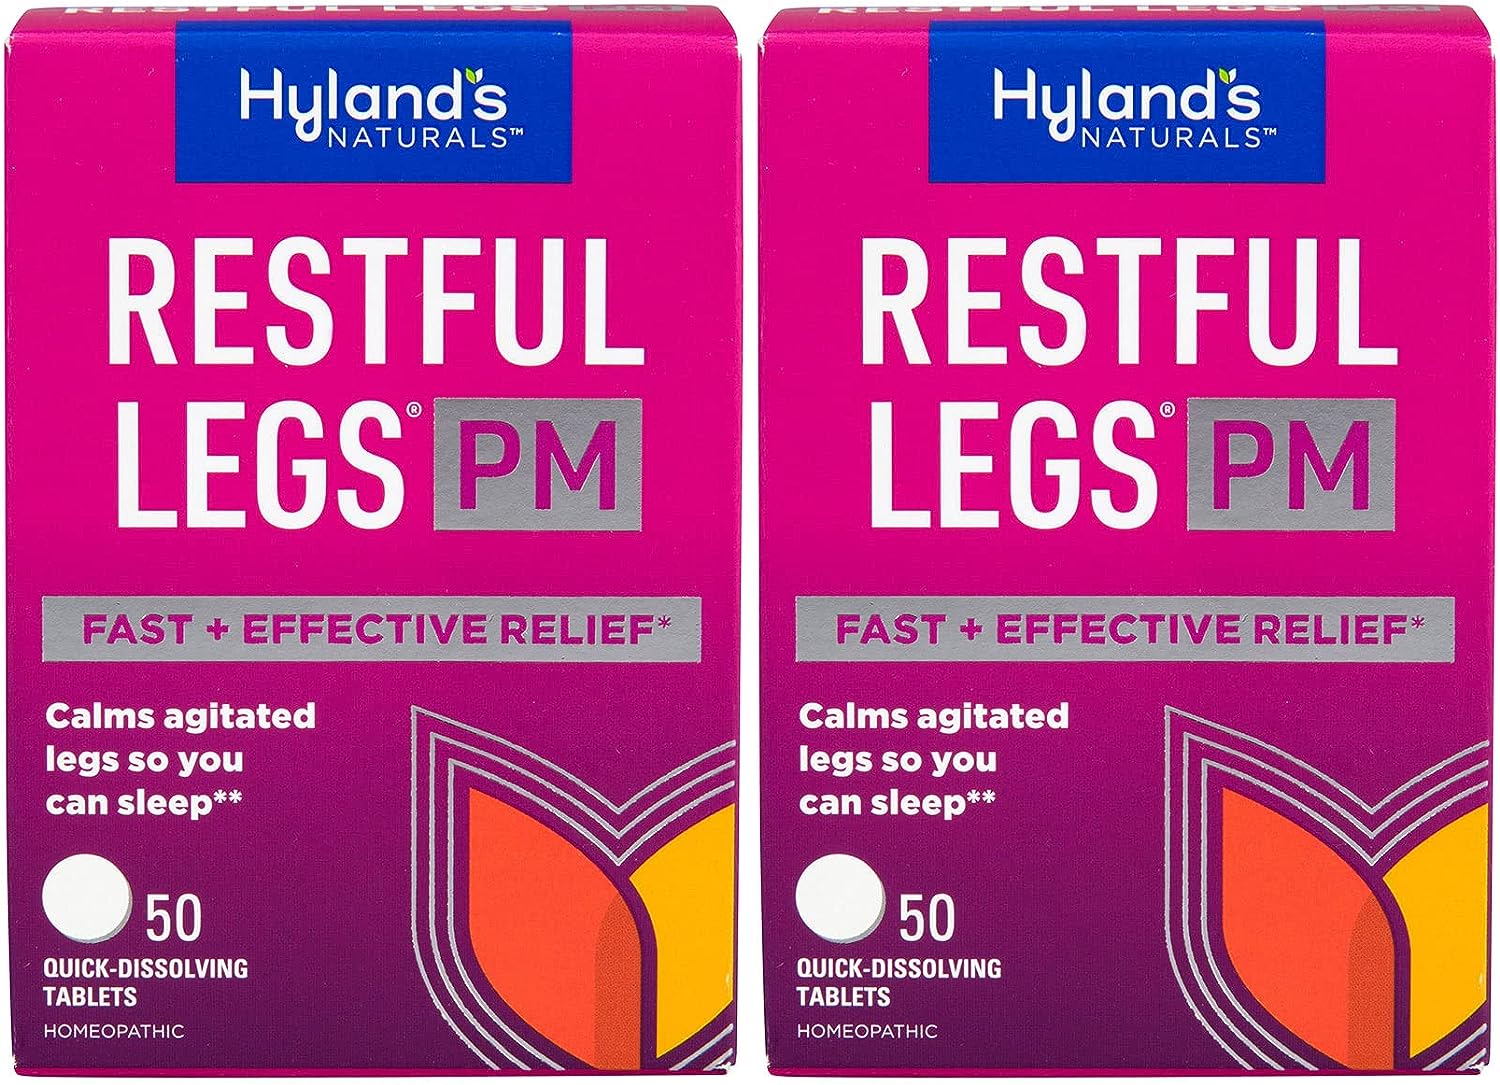 Hyland's Restful Legs PM Quick Dissolving Tablets - 50 Tablets (Pack of 2)